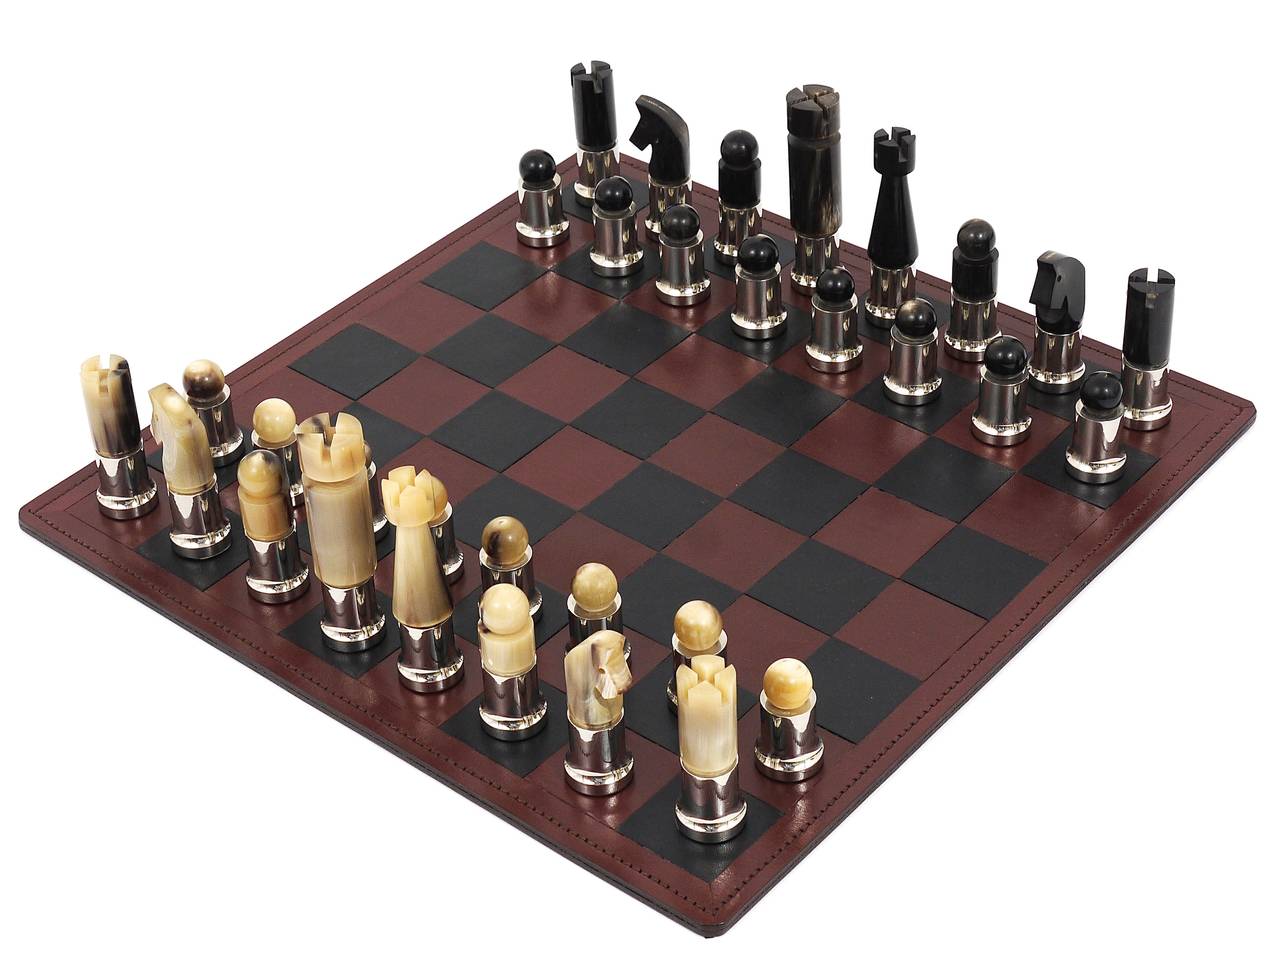 Very exceptional and beautiful Austrian chess game/chess men, designed and executed in the early 1970s by Austrian Modernist Carl Auböck. Discontinued vintage chess game, made of light and dark cow Horn and nickel-plated metal. Comes with